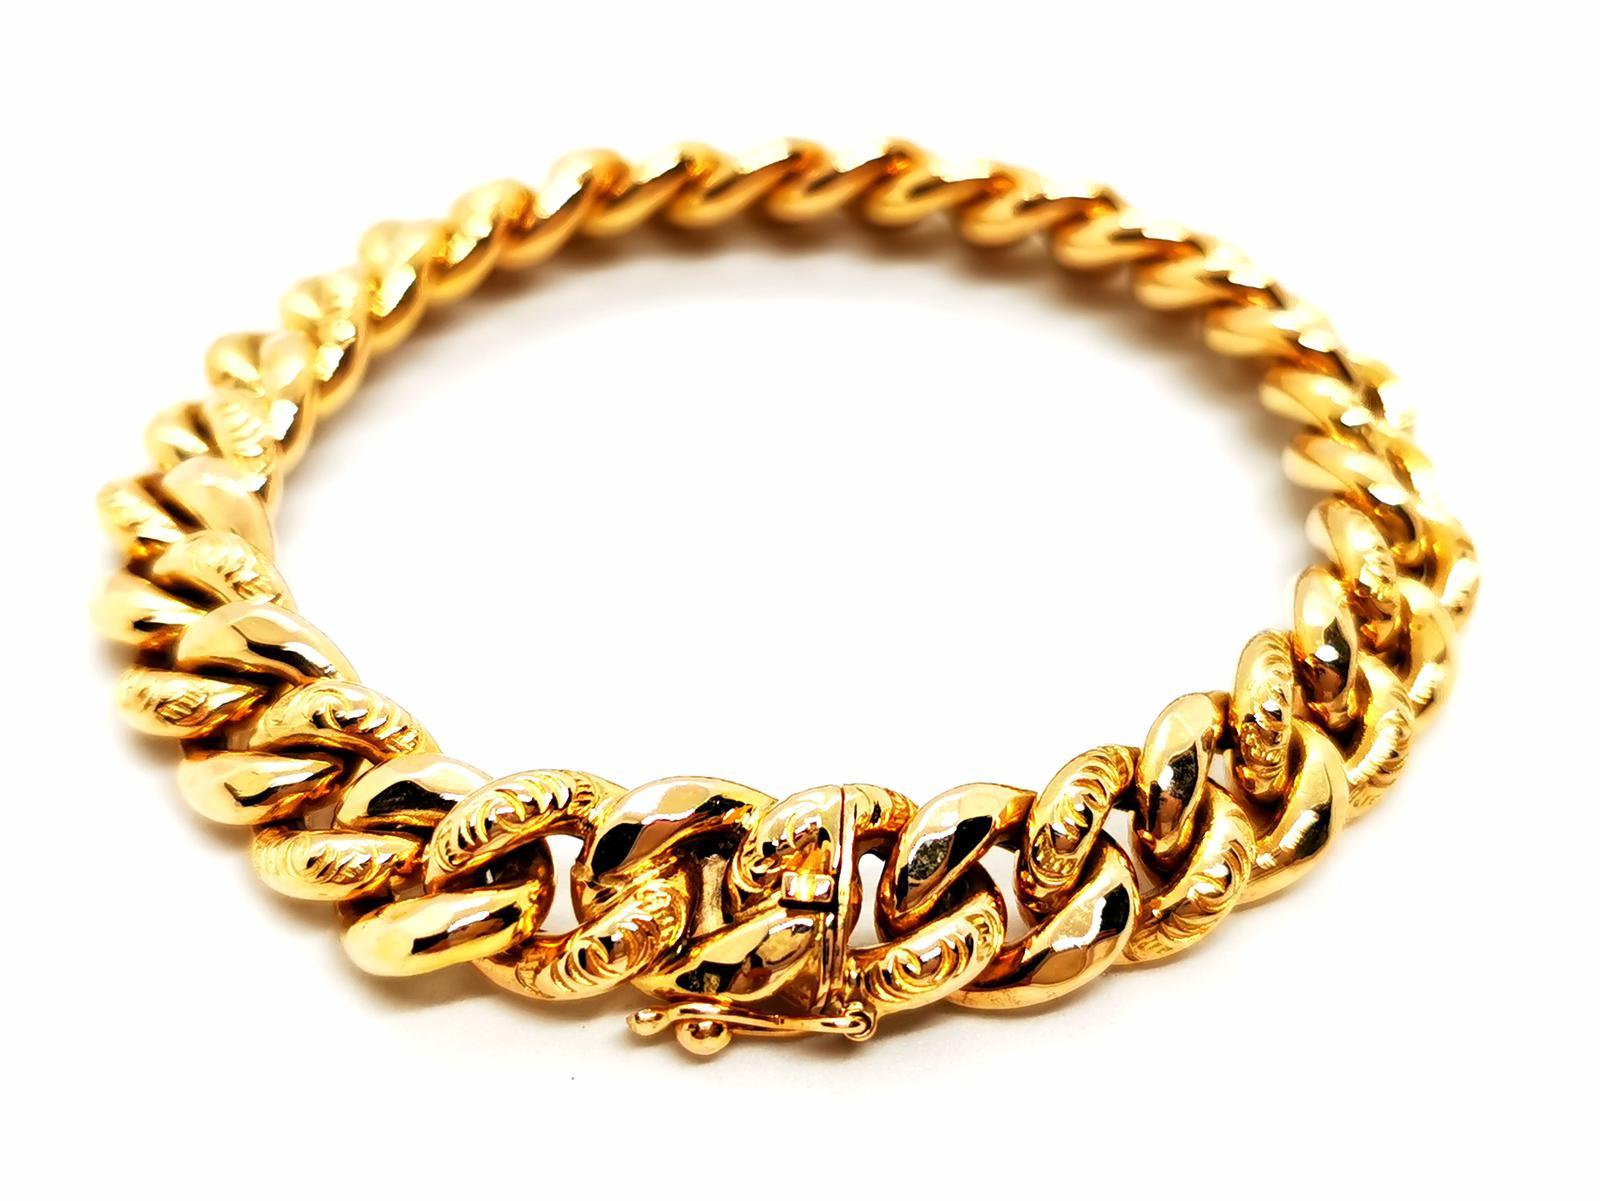 Bracelet in yellow gold 750 thousandths (18 carats). gourmet mesh with eight safety. length: 19 cm. width: 0.86 cm. total weight: 20.25 g. eagle head hallmark. excellent condition.
